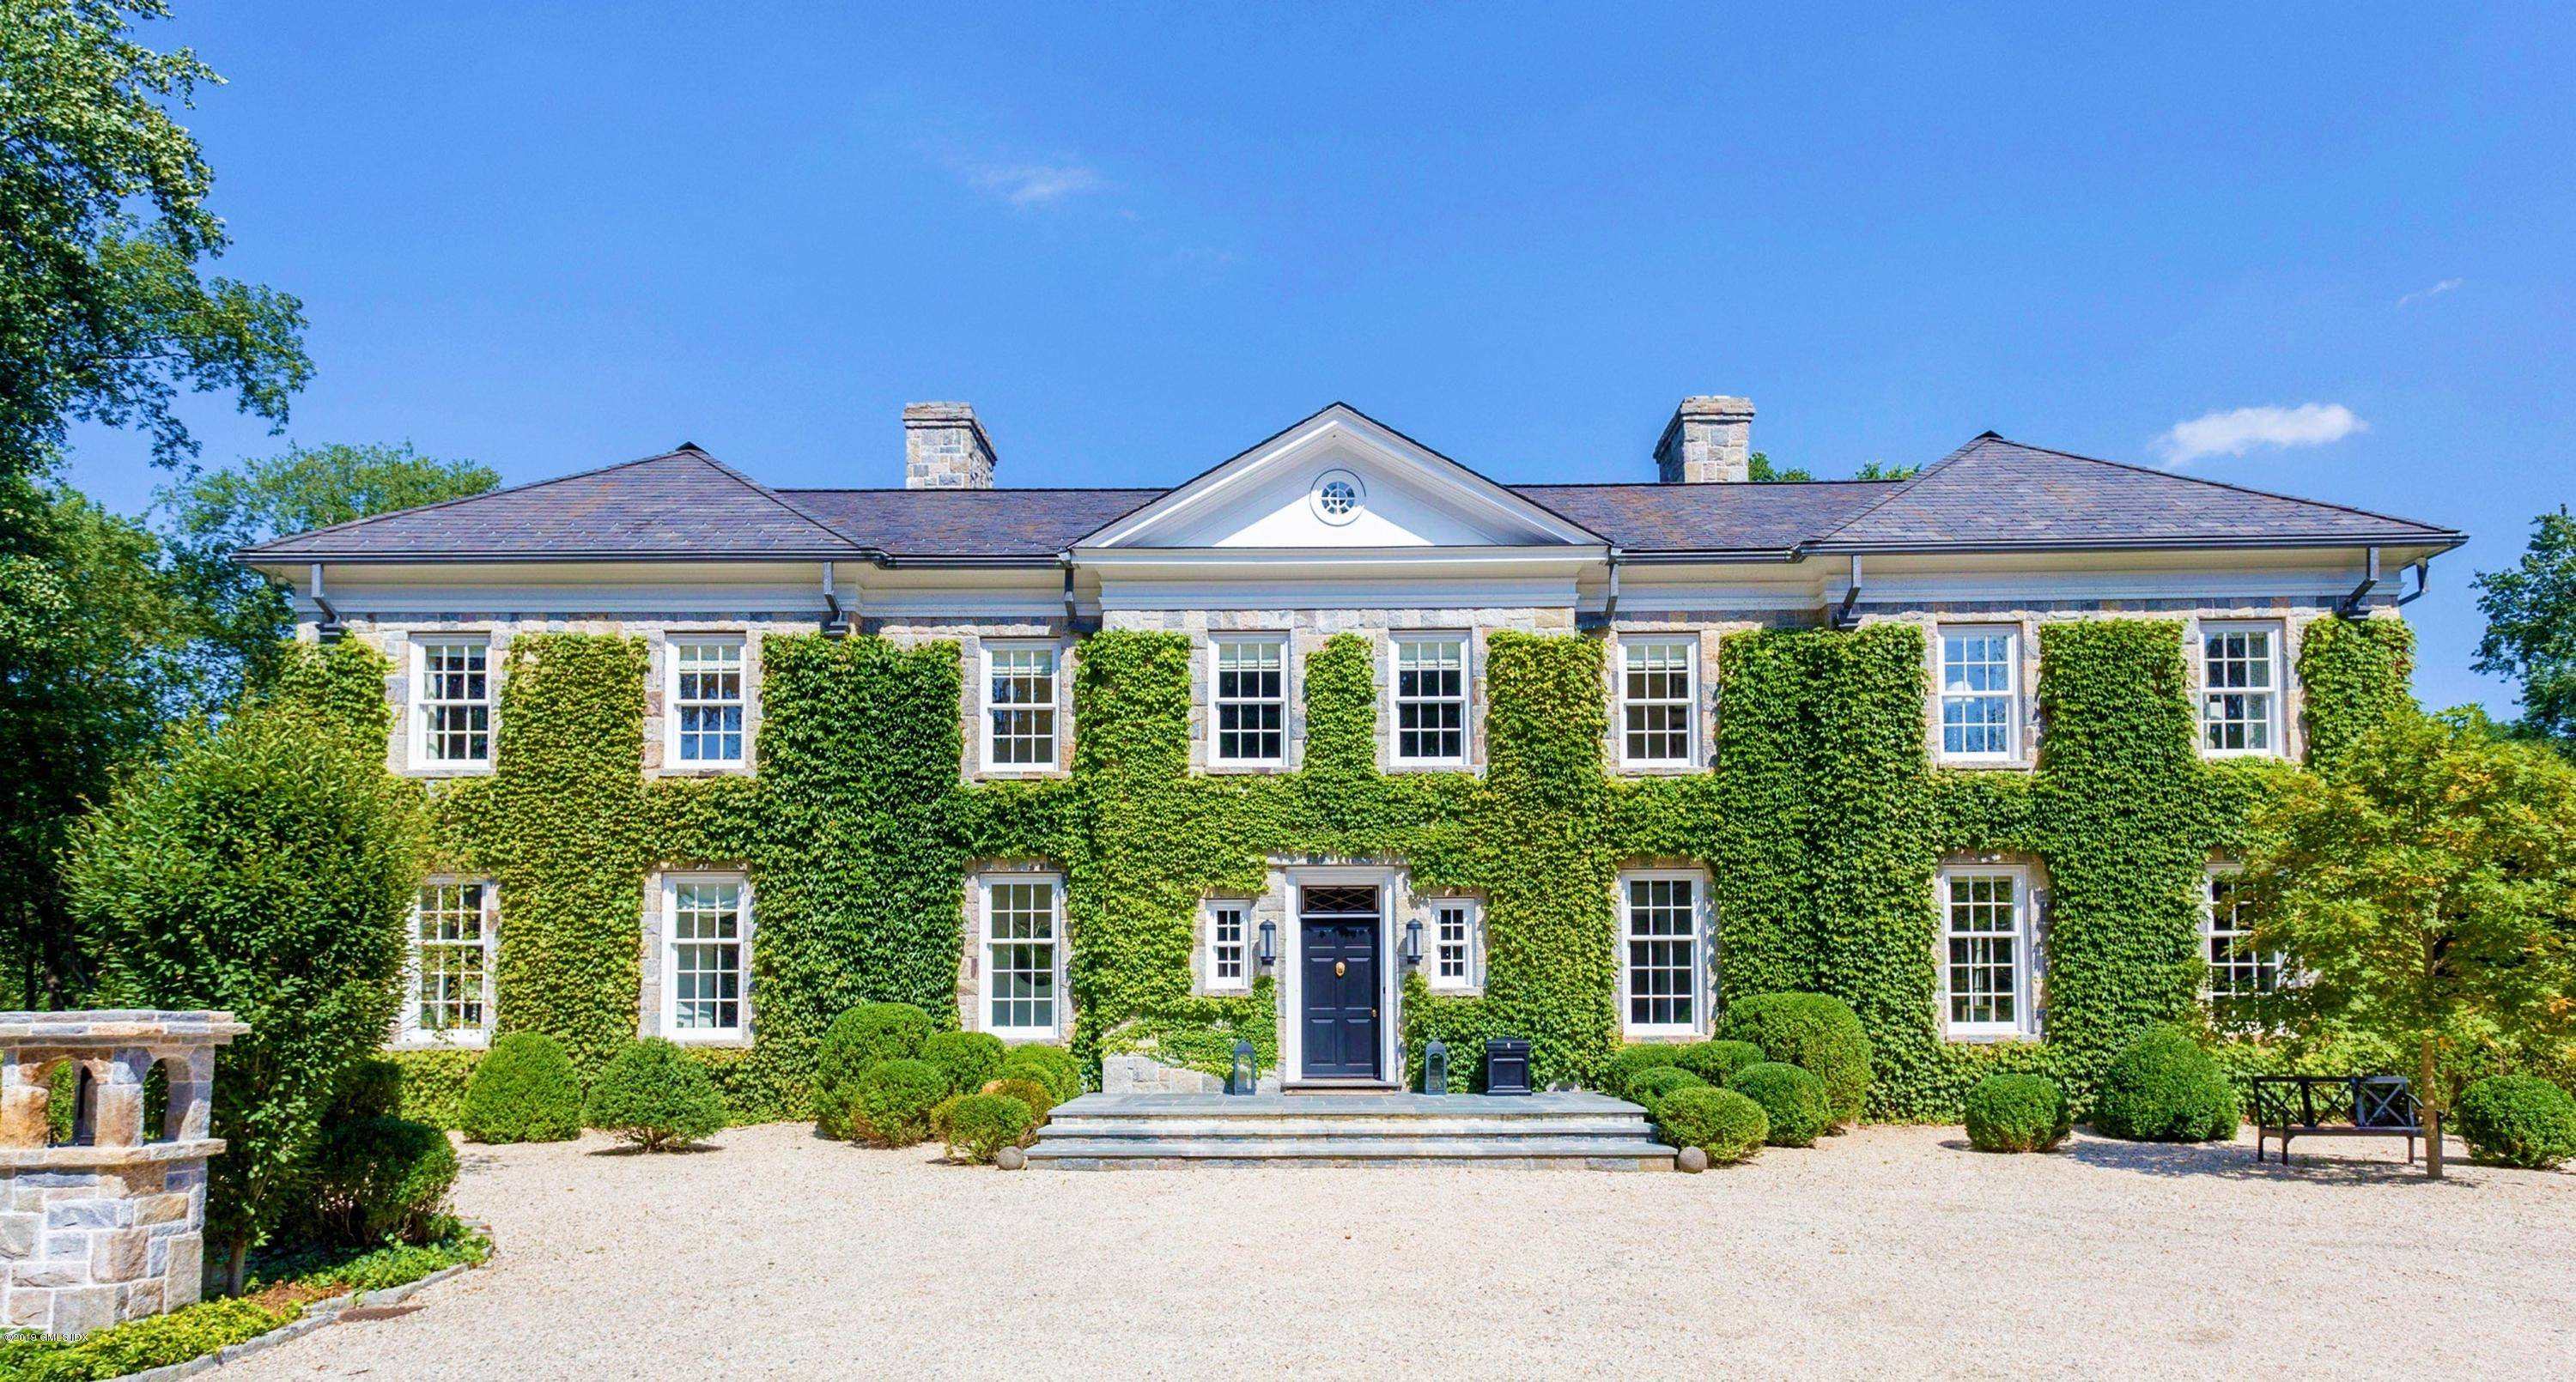 This elegant and stately Georgian manor nestled in a breath taking and private botanical garden of fruit trees, perennial gardens, trickling stream and pathways is constructed with hand chiseled stone ...